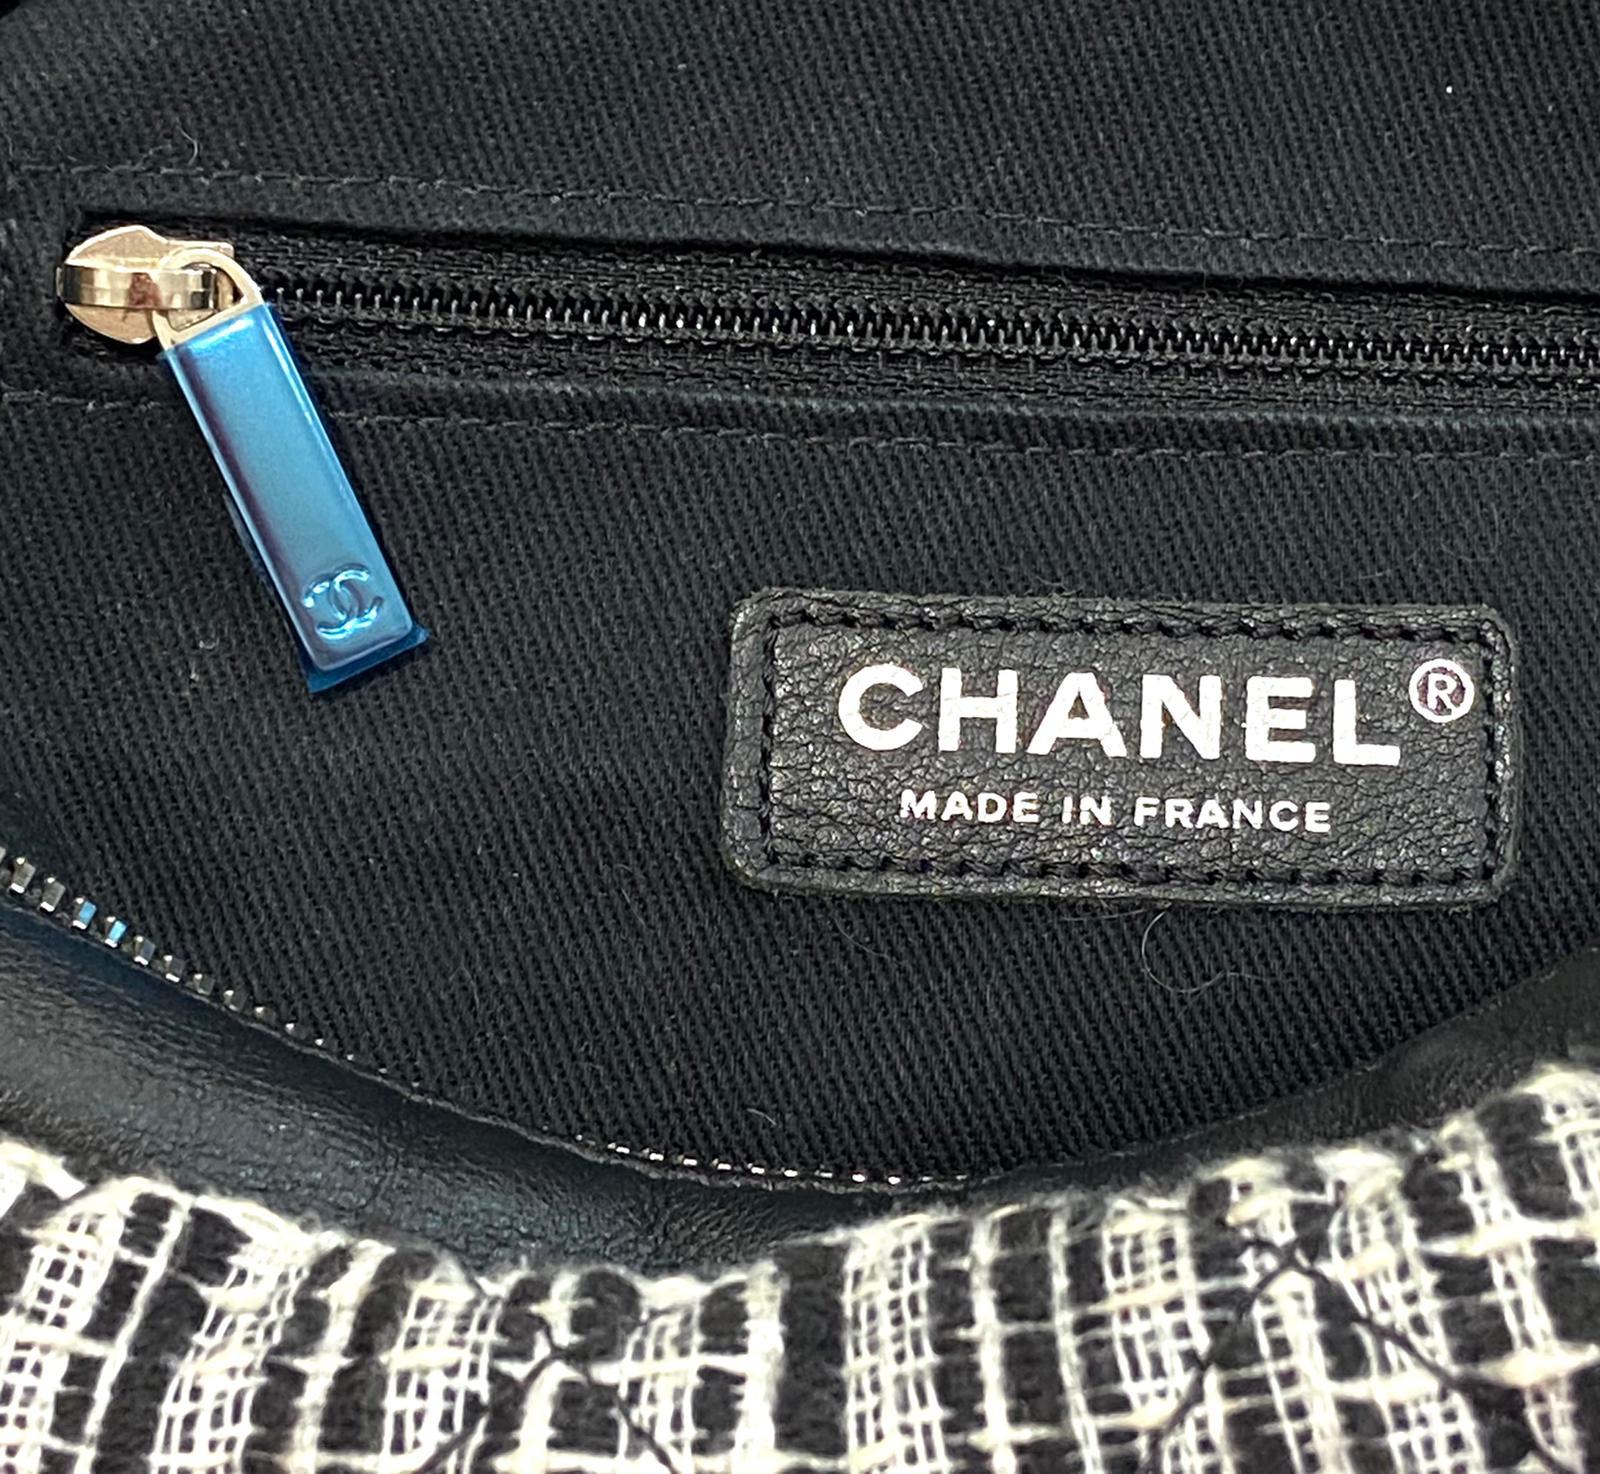 Chanel No5 Tweed & Leather Bag For Sale 5